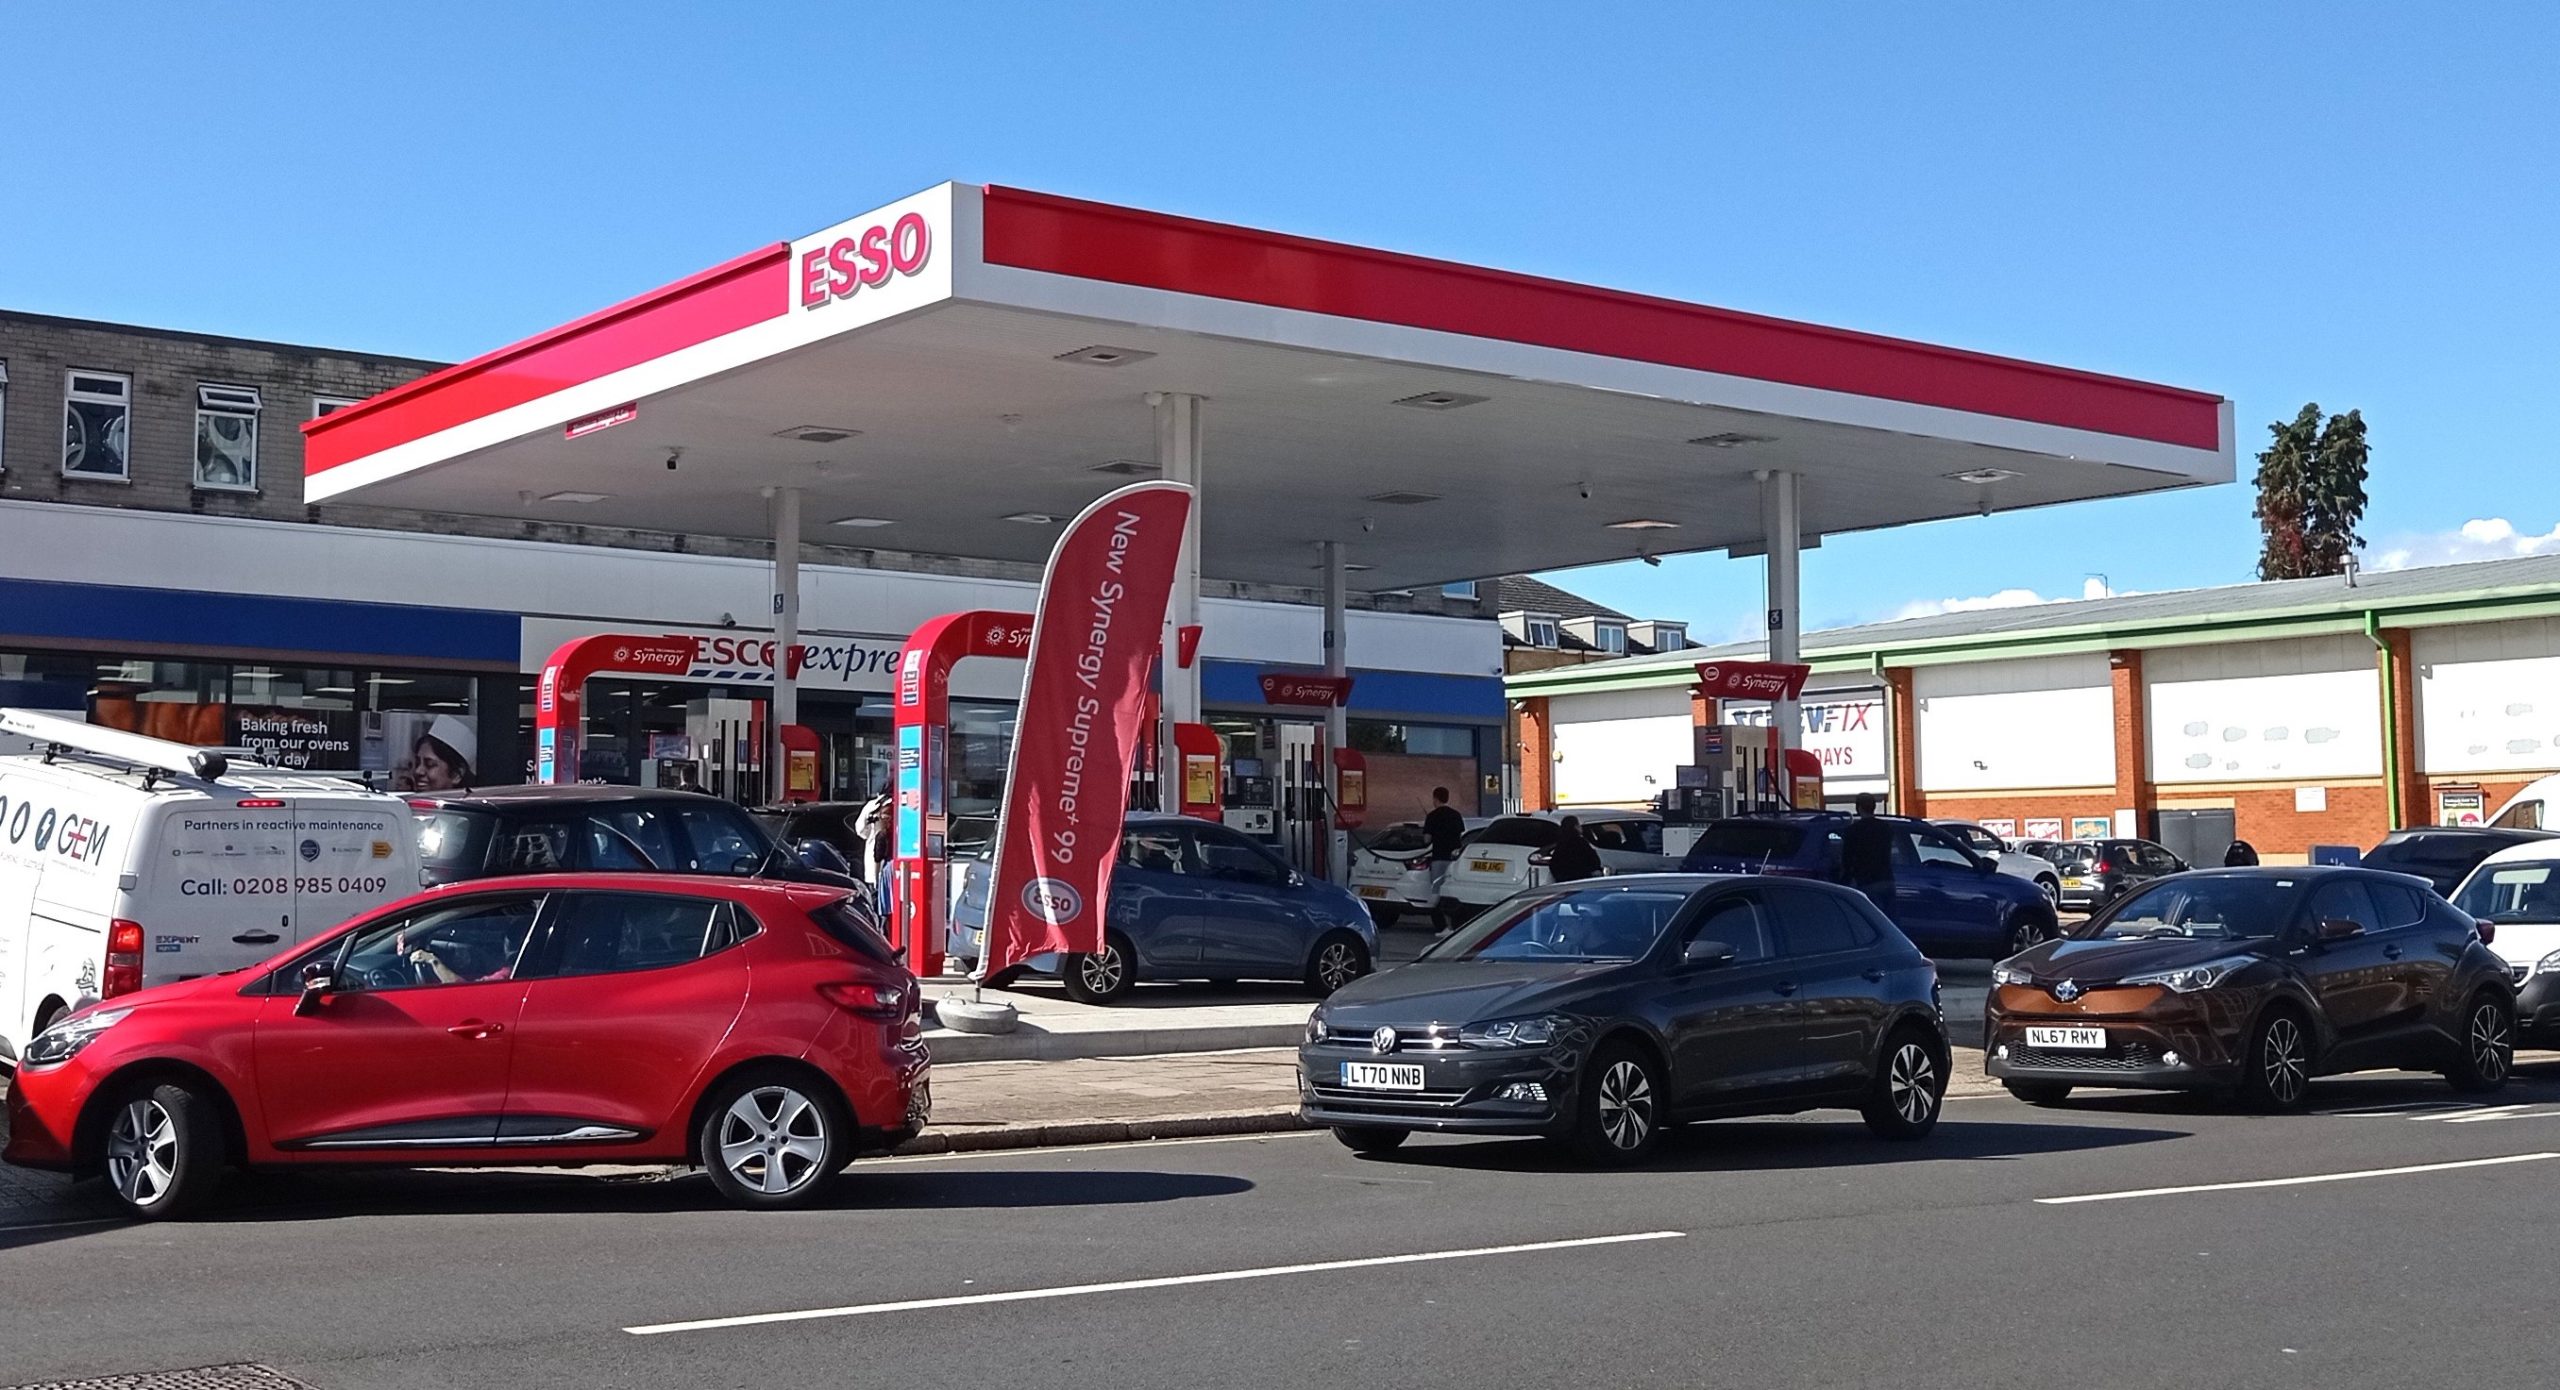 Queues for fuel at East Barnet Esso service station on Monday. The Prime Minister Boris Johnson said the crisis showed signs of getting better but cab drivers told a different story. Photo credit: Wikicommons / Philafrenzy